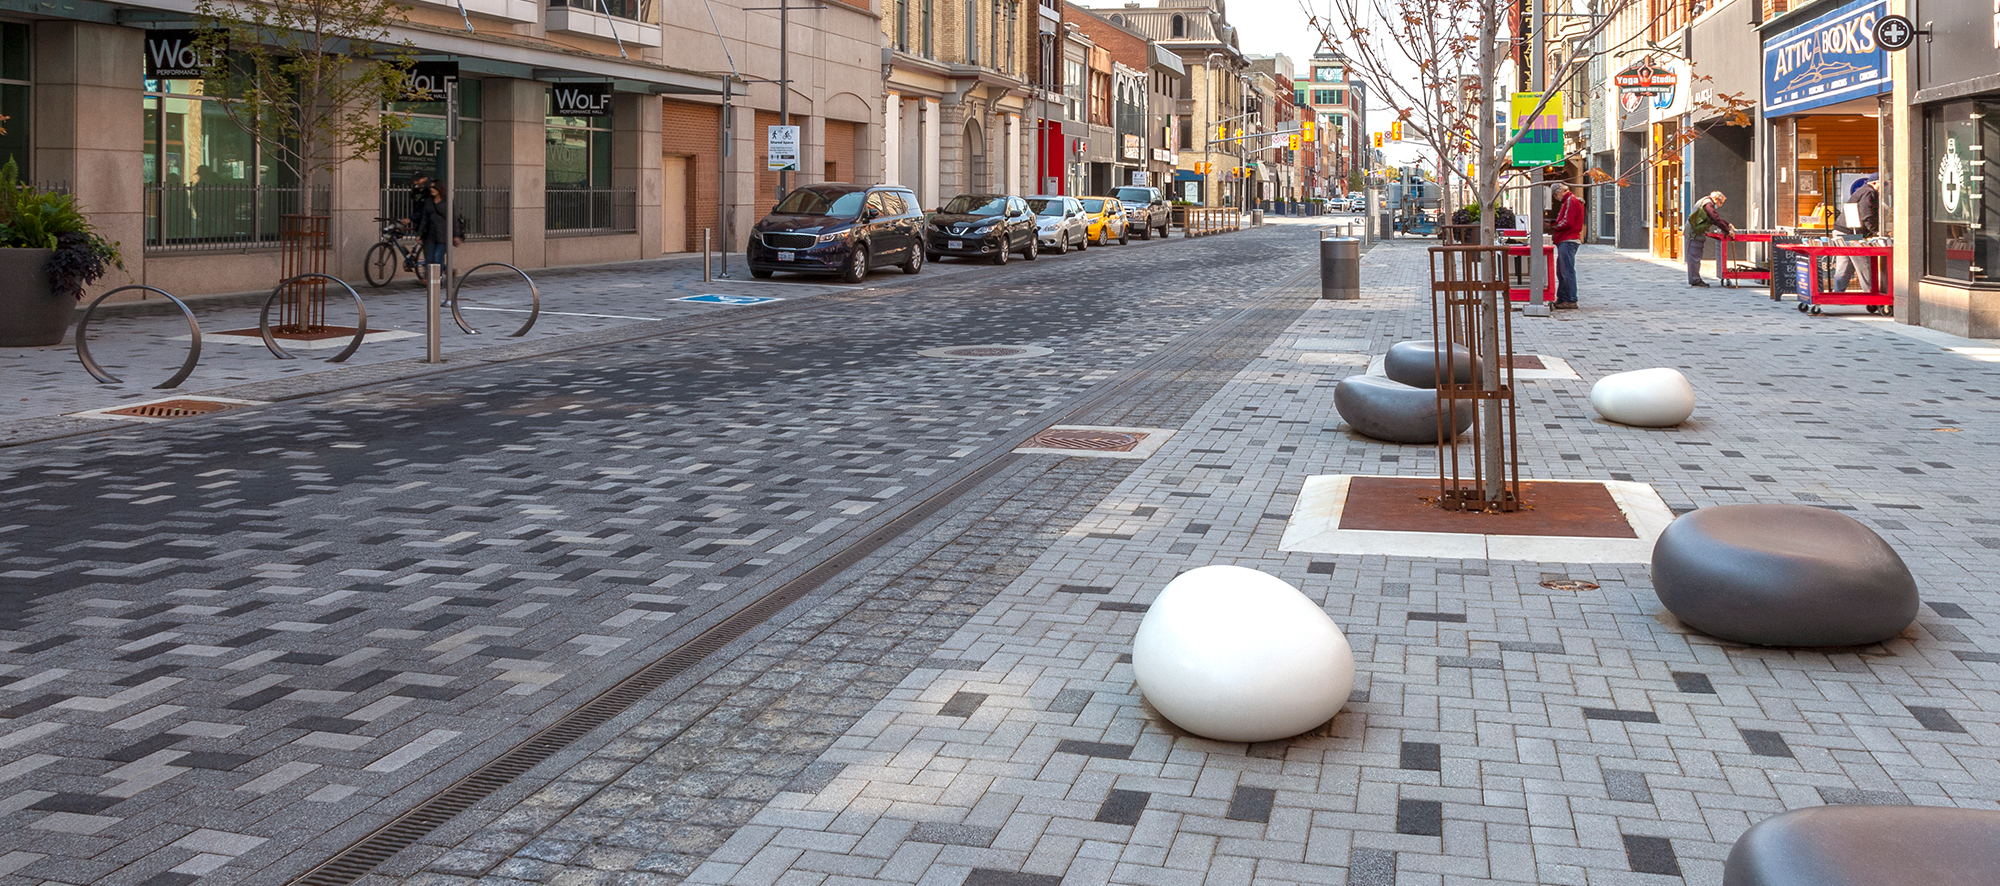 Dundas Place streetscape has Series pavers with alternating tones creating patterns, bike racks, and large smooth rocks to sit on.